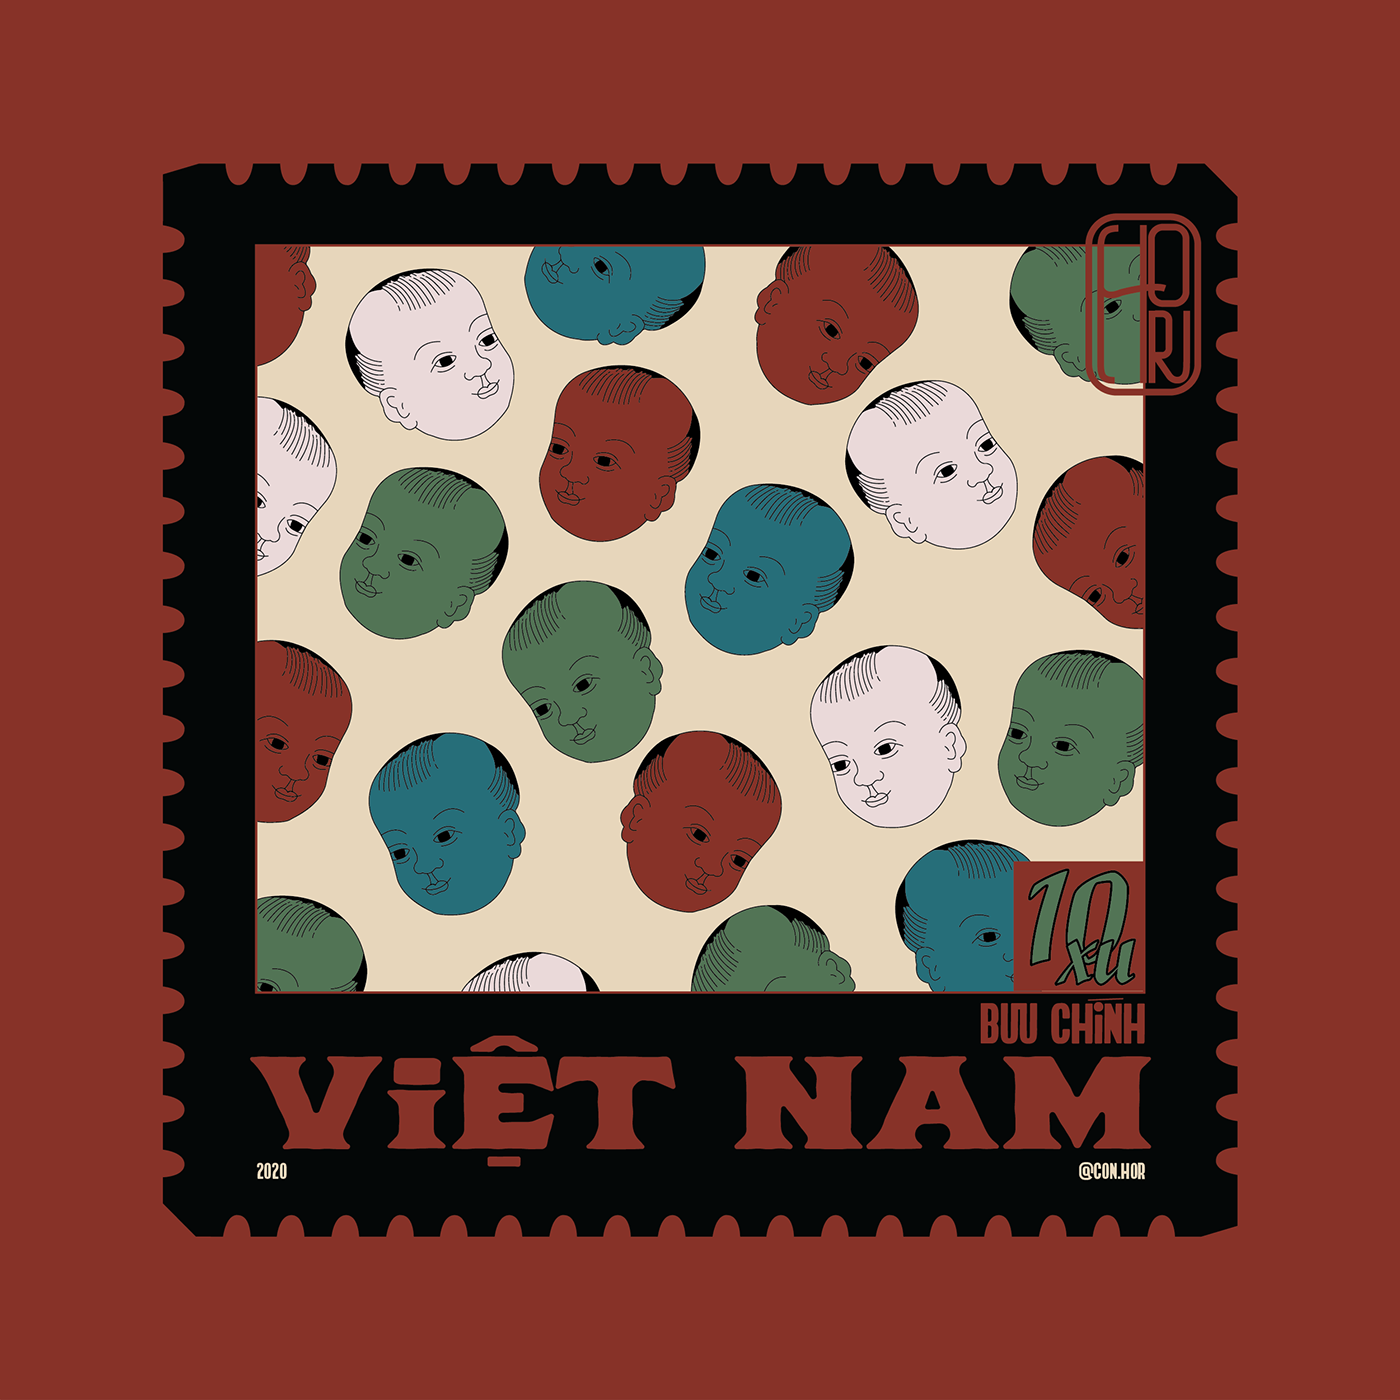 Ancient art asian dong ho graphic history stamp tradition viet nam vietnam